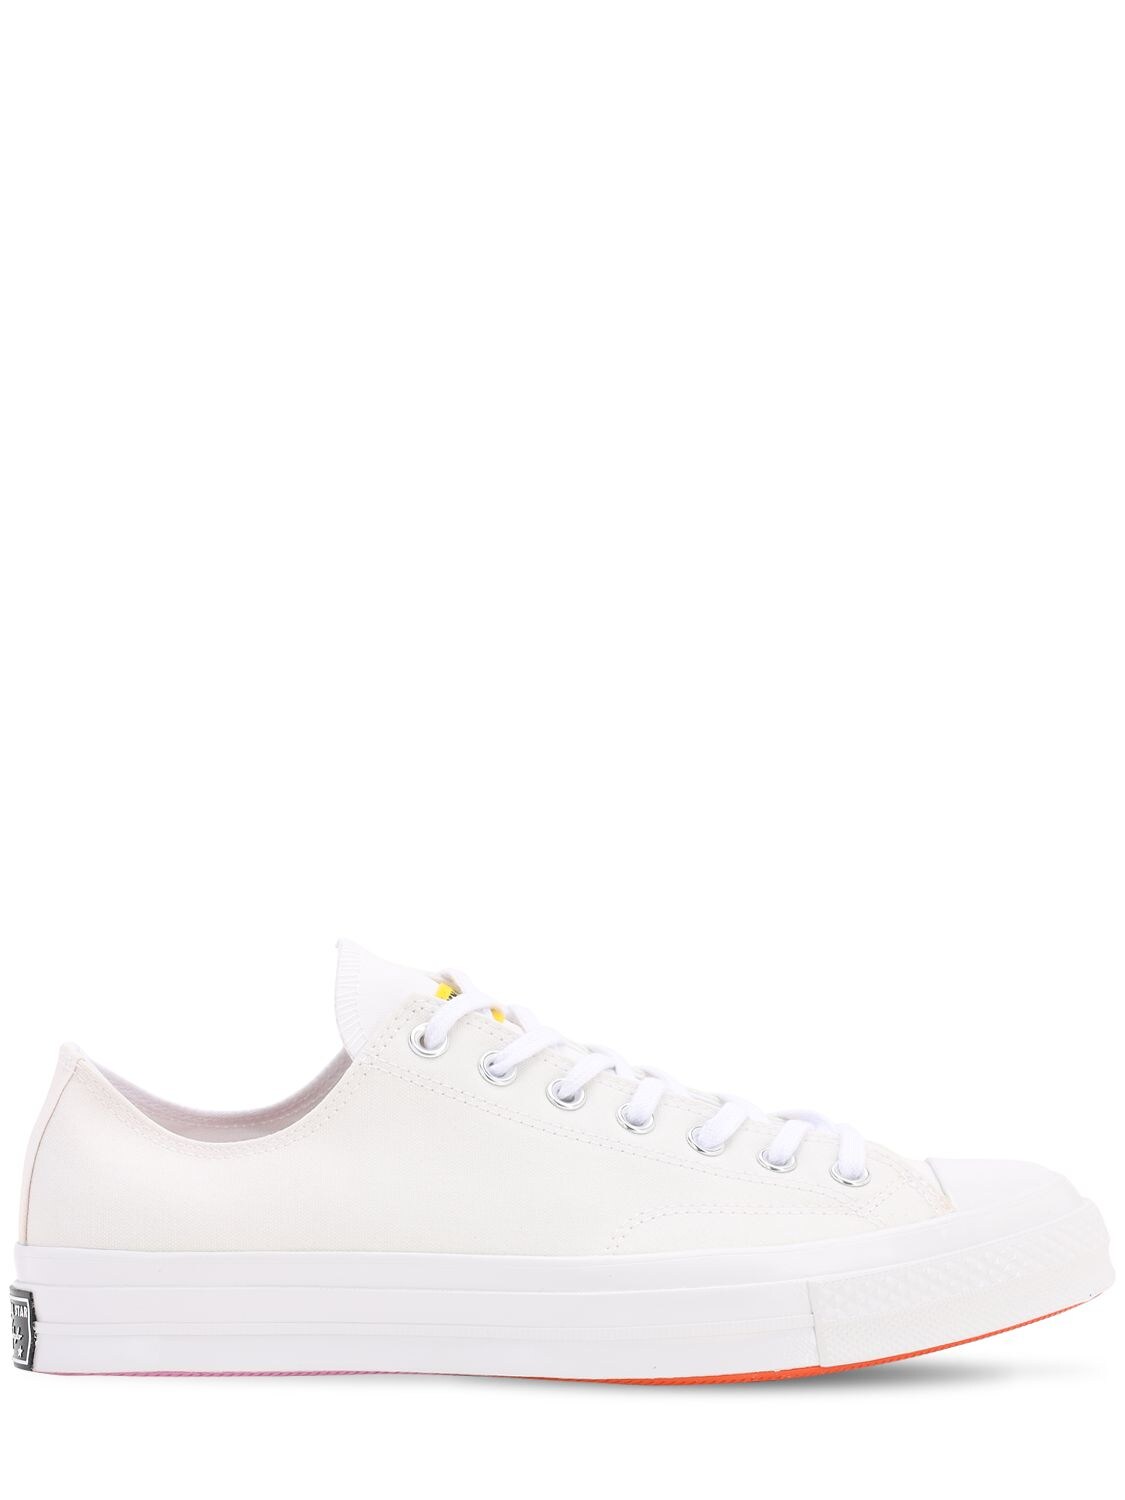 CONVERSE CHINATOWN MARKET CHUCK 70 OX trainers,70IXGN021-MTAY0